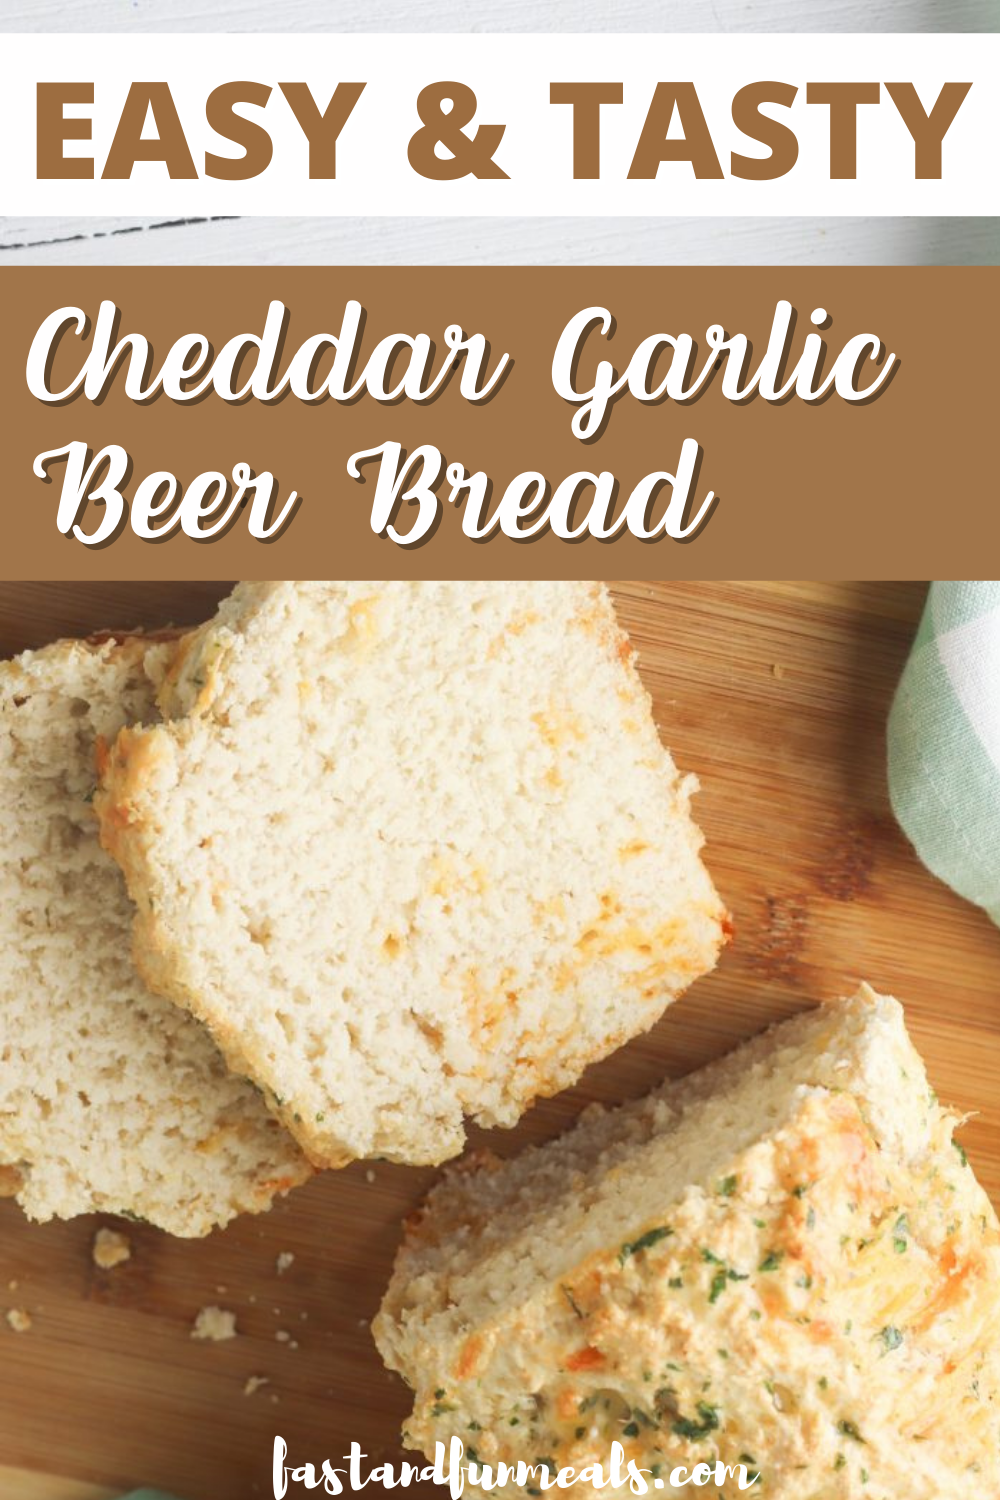 Pin showing Easy and Tasty Cheesy Garlic Beer Bread